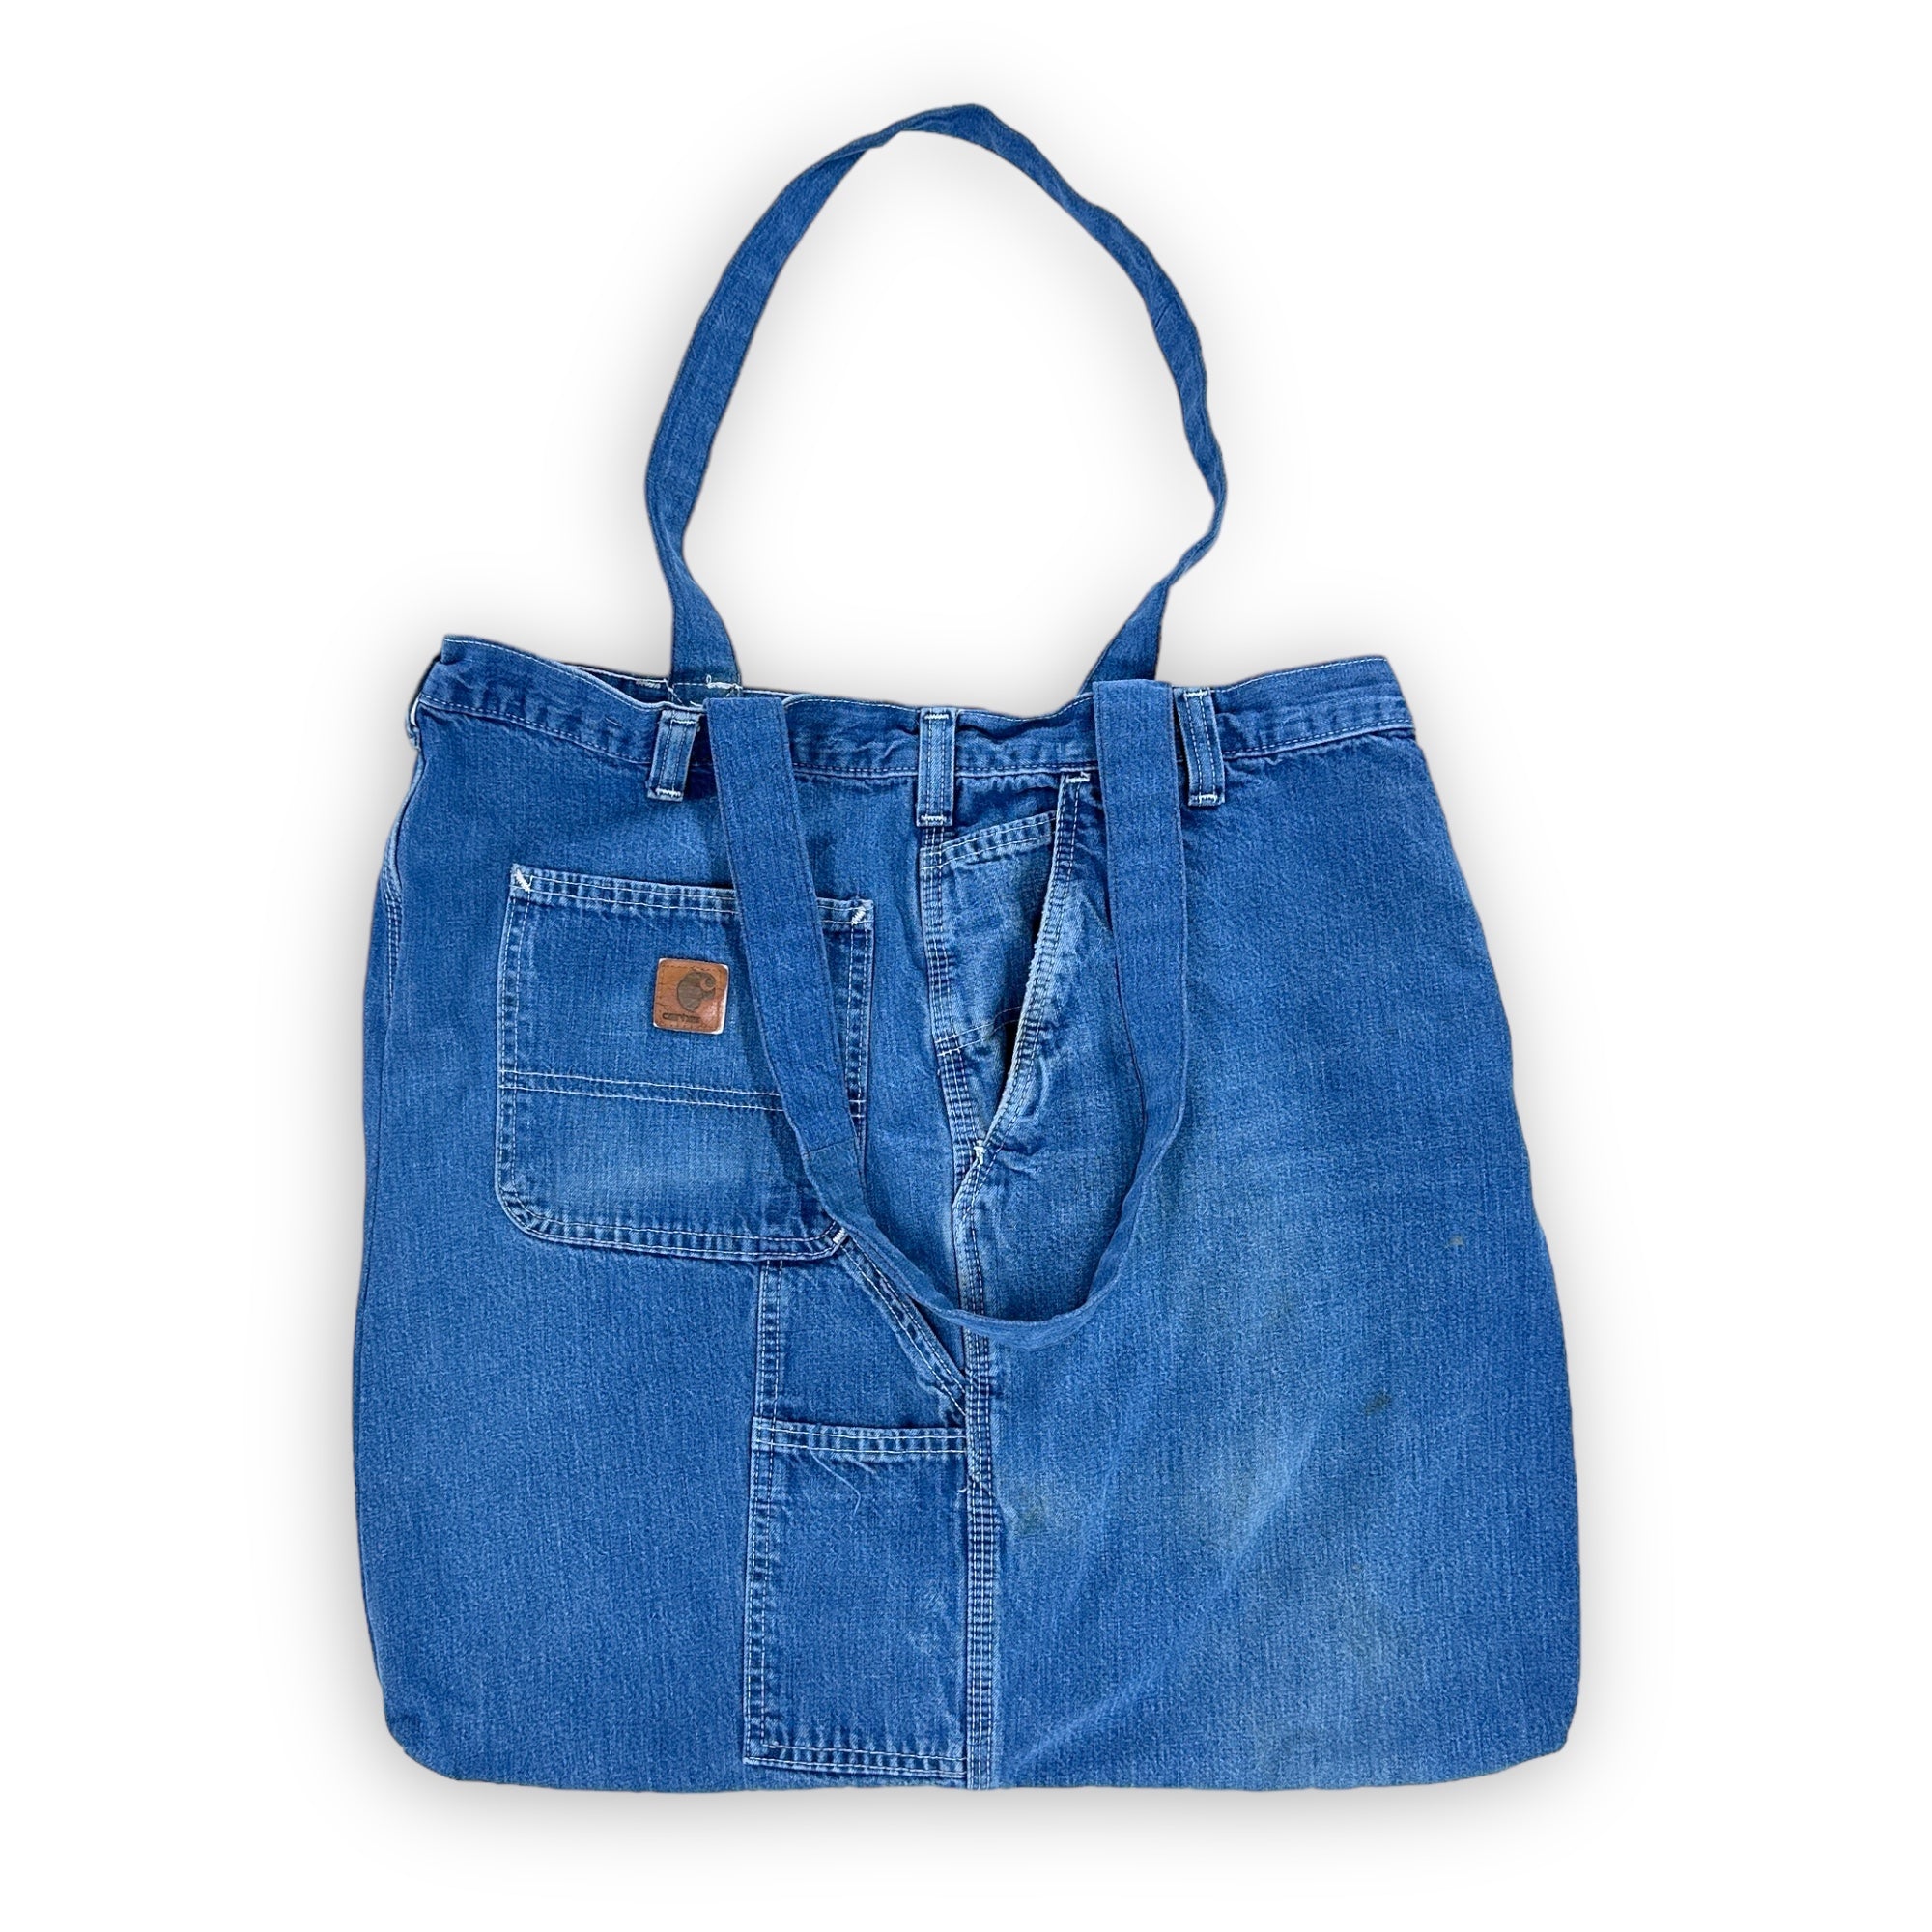 Thrashed Recycled Carhartt Jeans Tote Bag